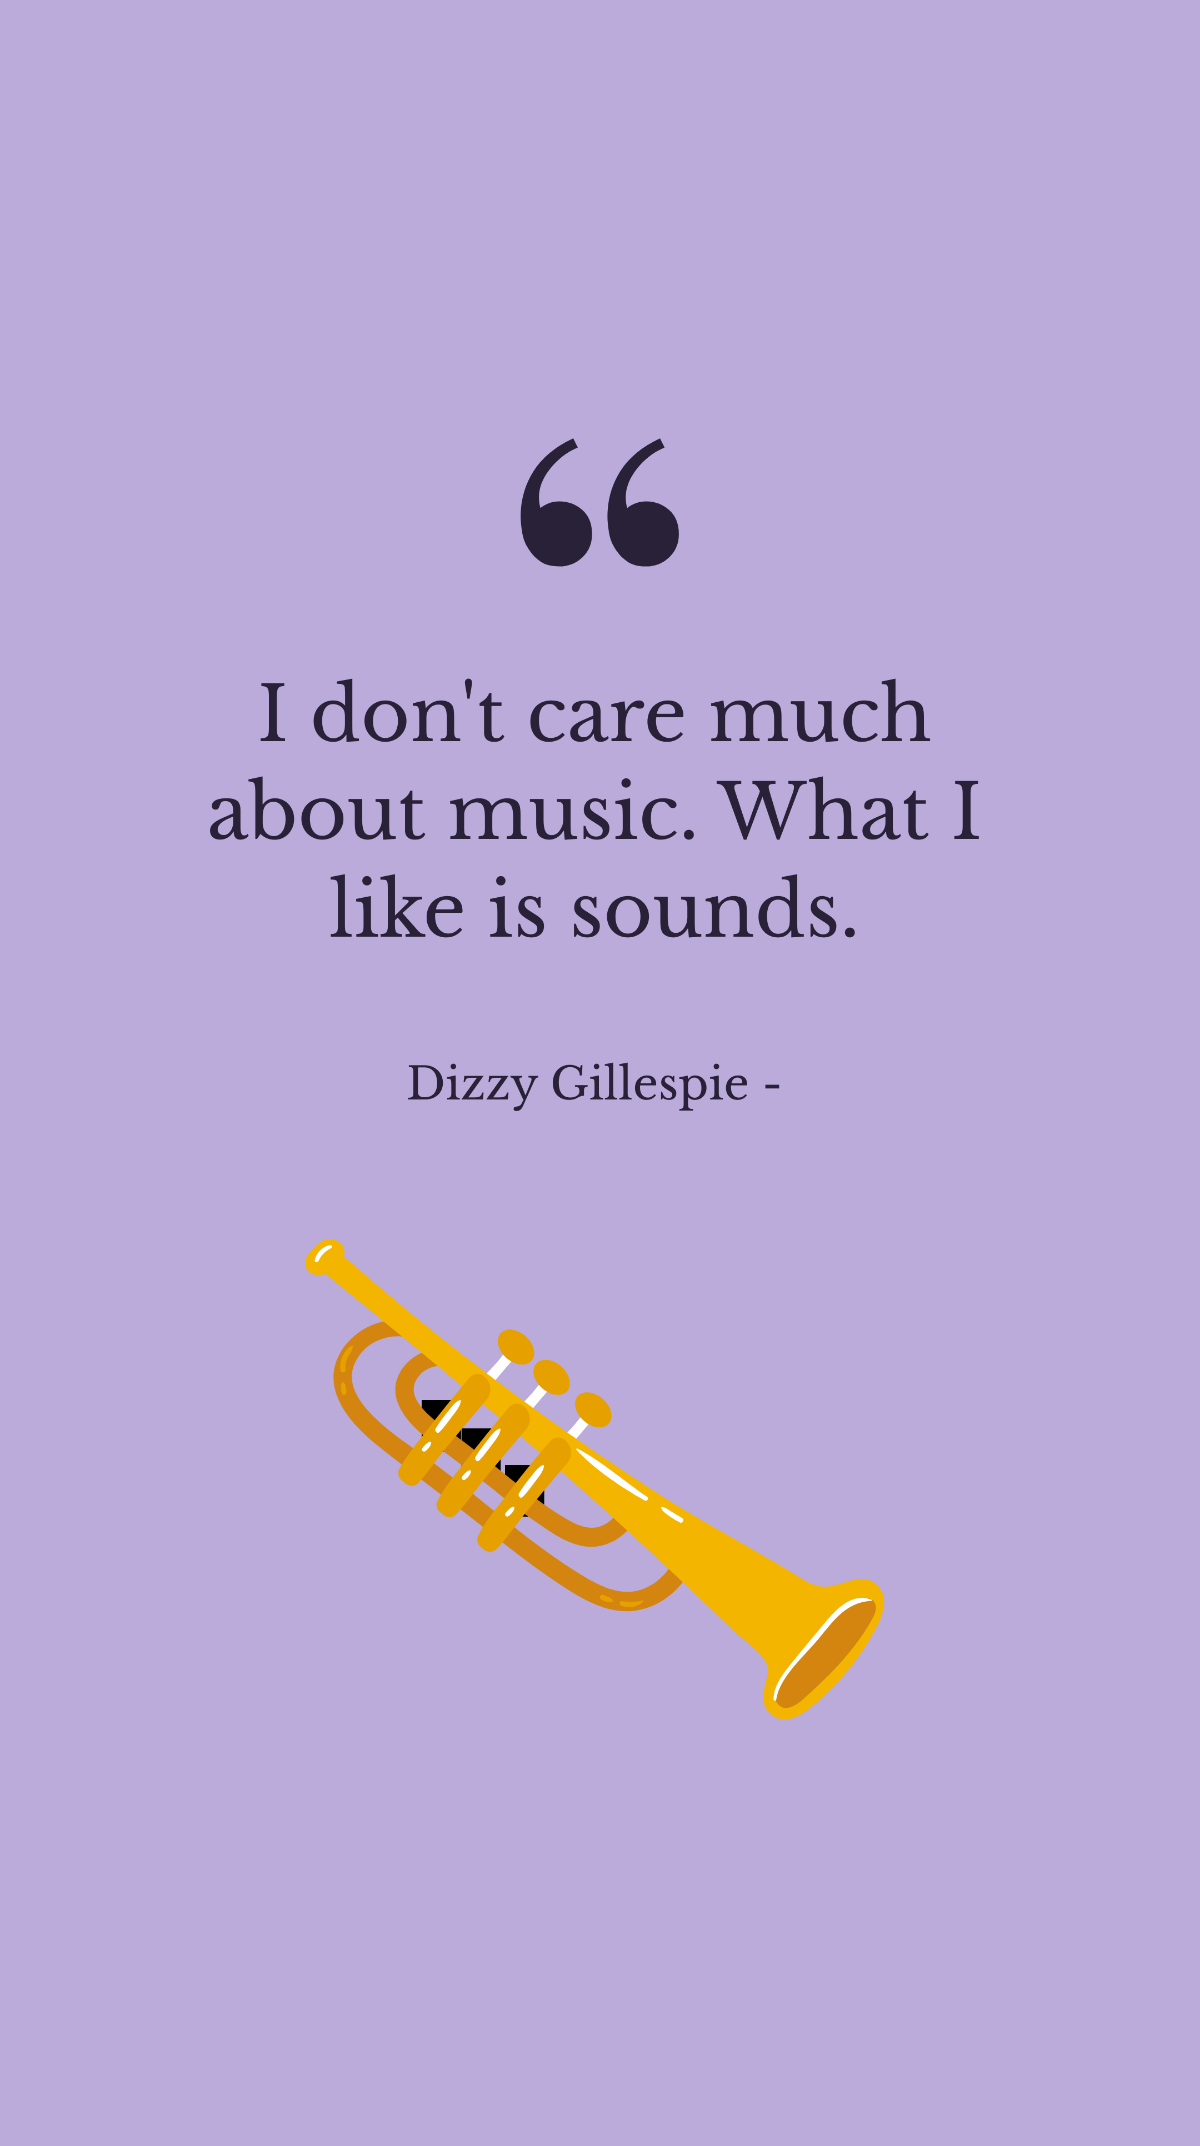 Dizzy Gillespie - I don't care much about music. What I like is sounds.